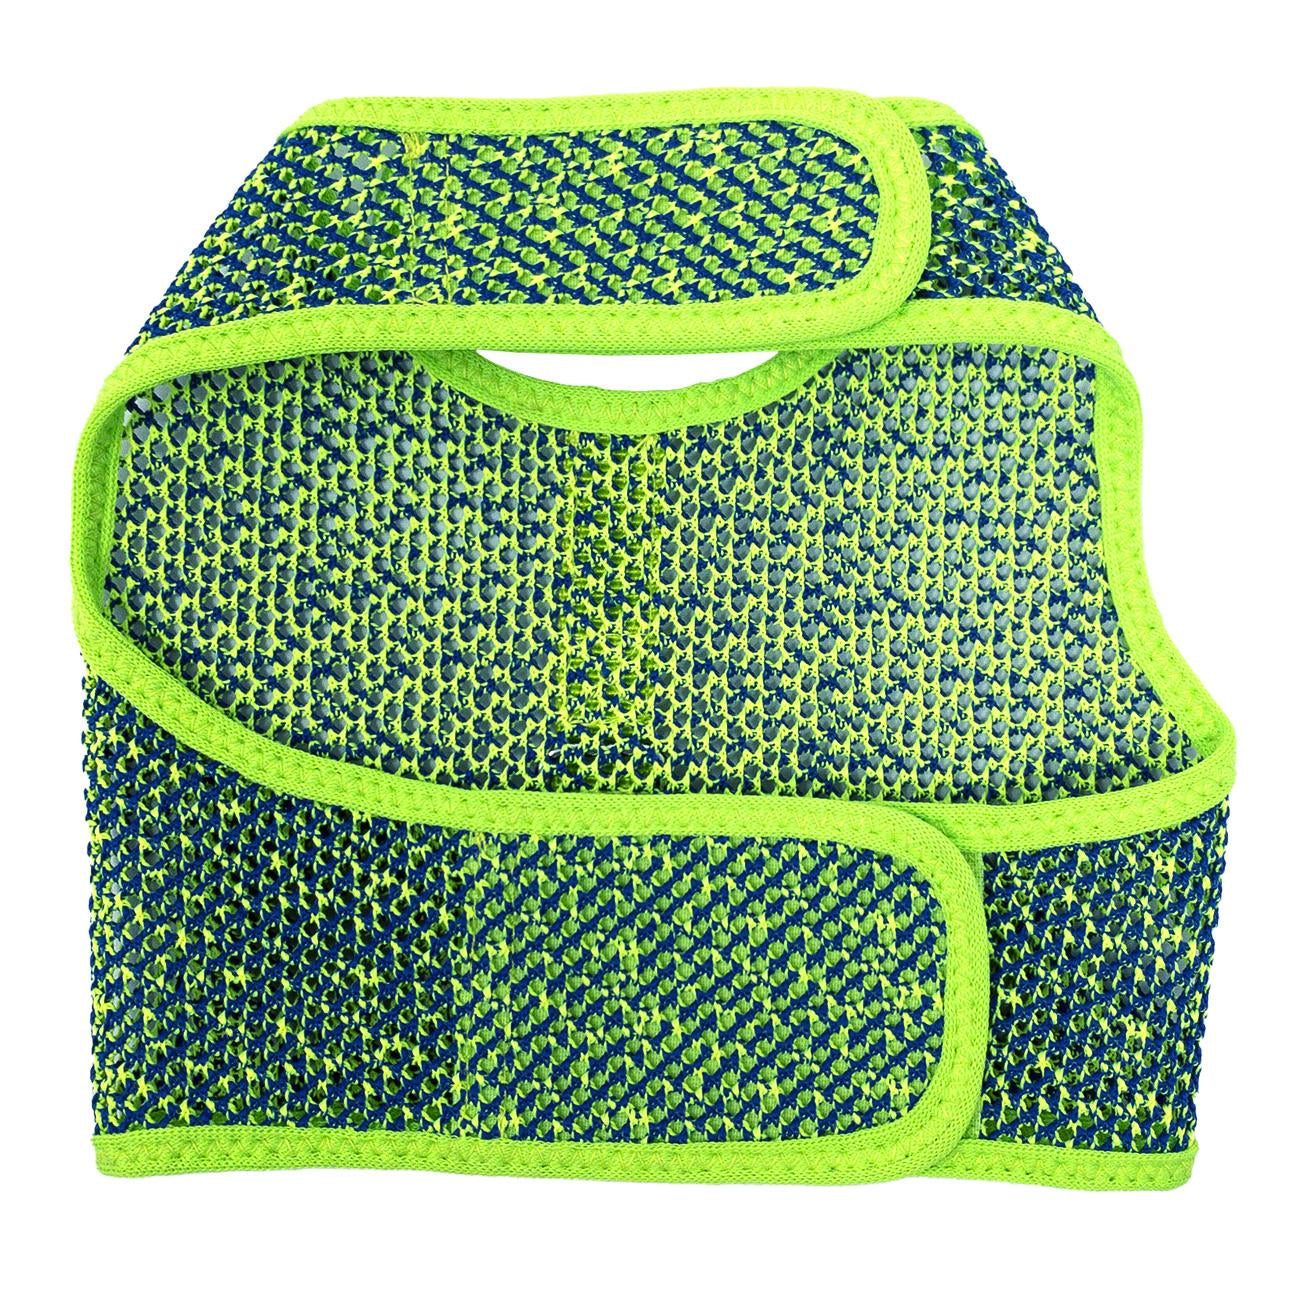 Active Mesh Dog Harness with Leash - Neon Green & Blue